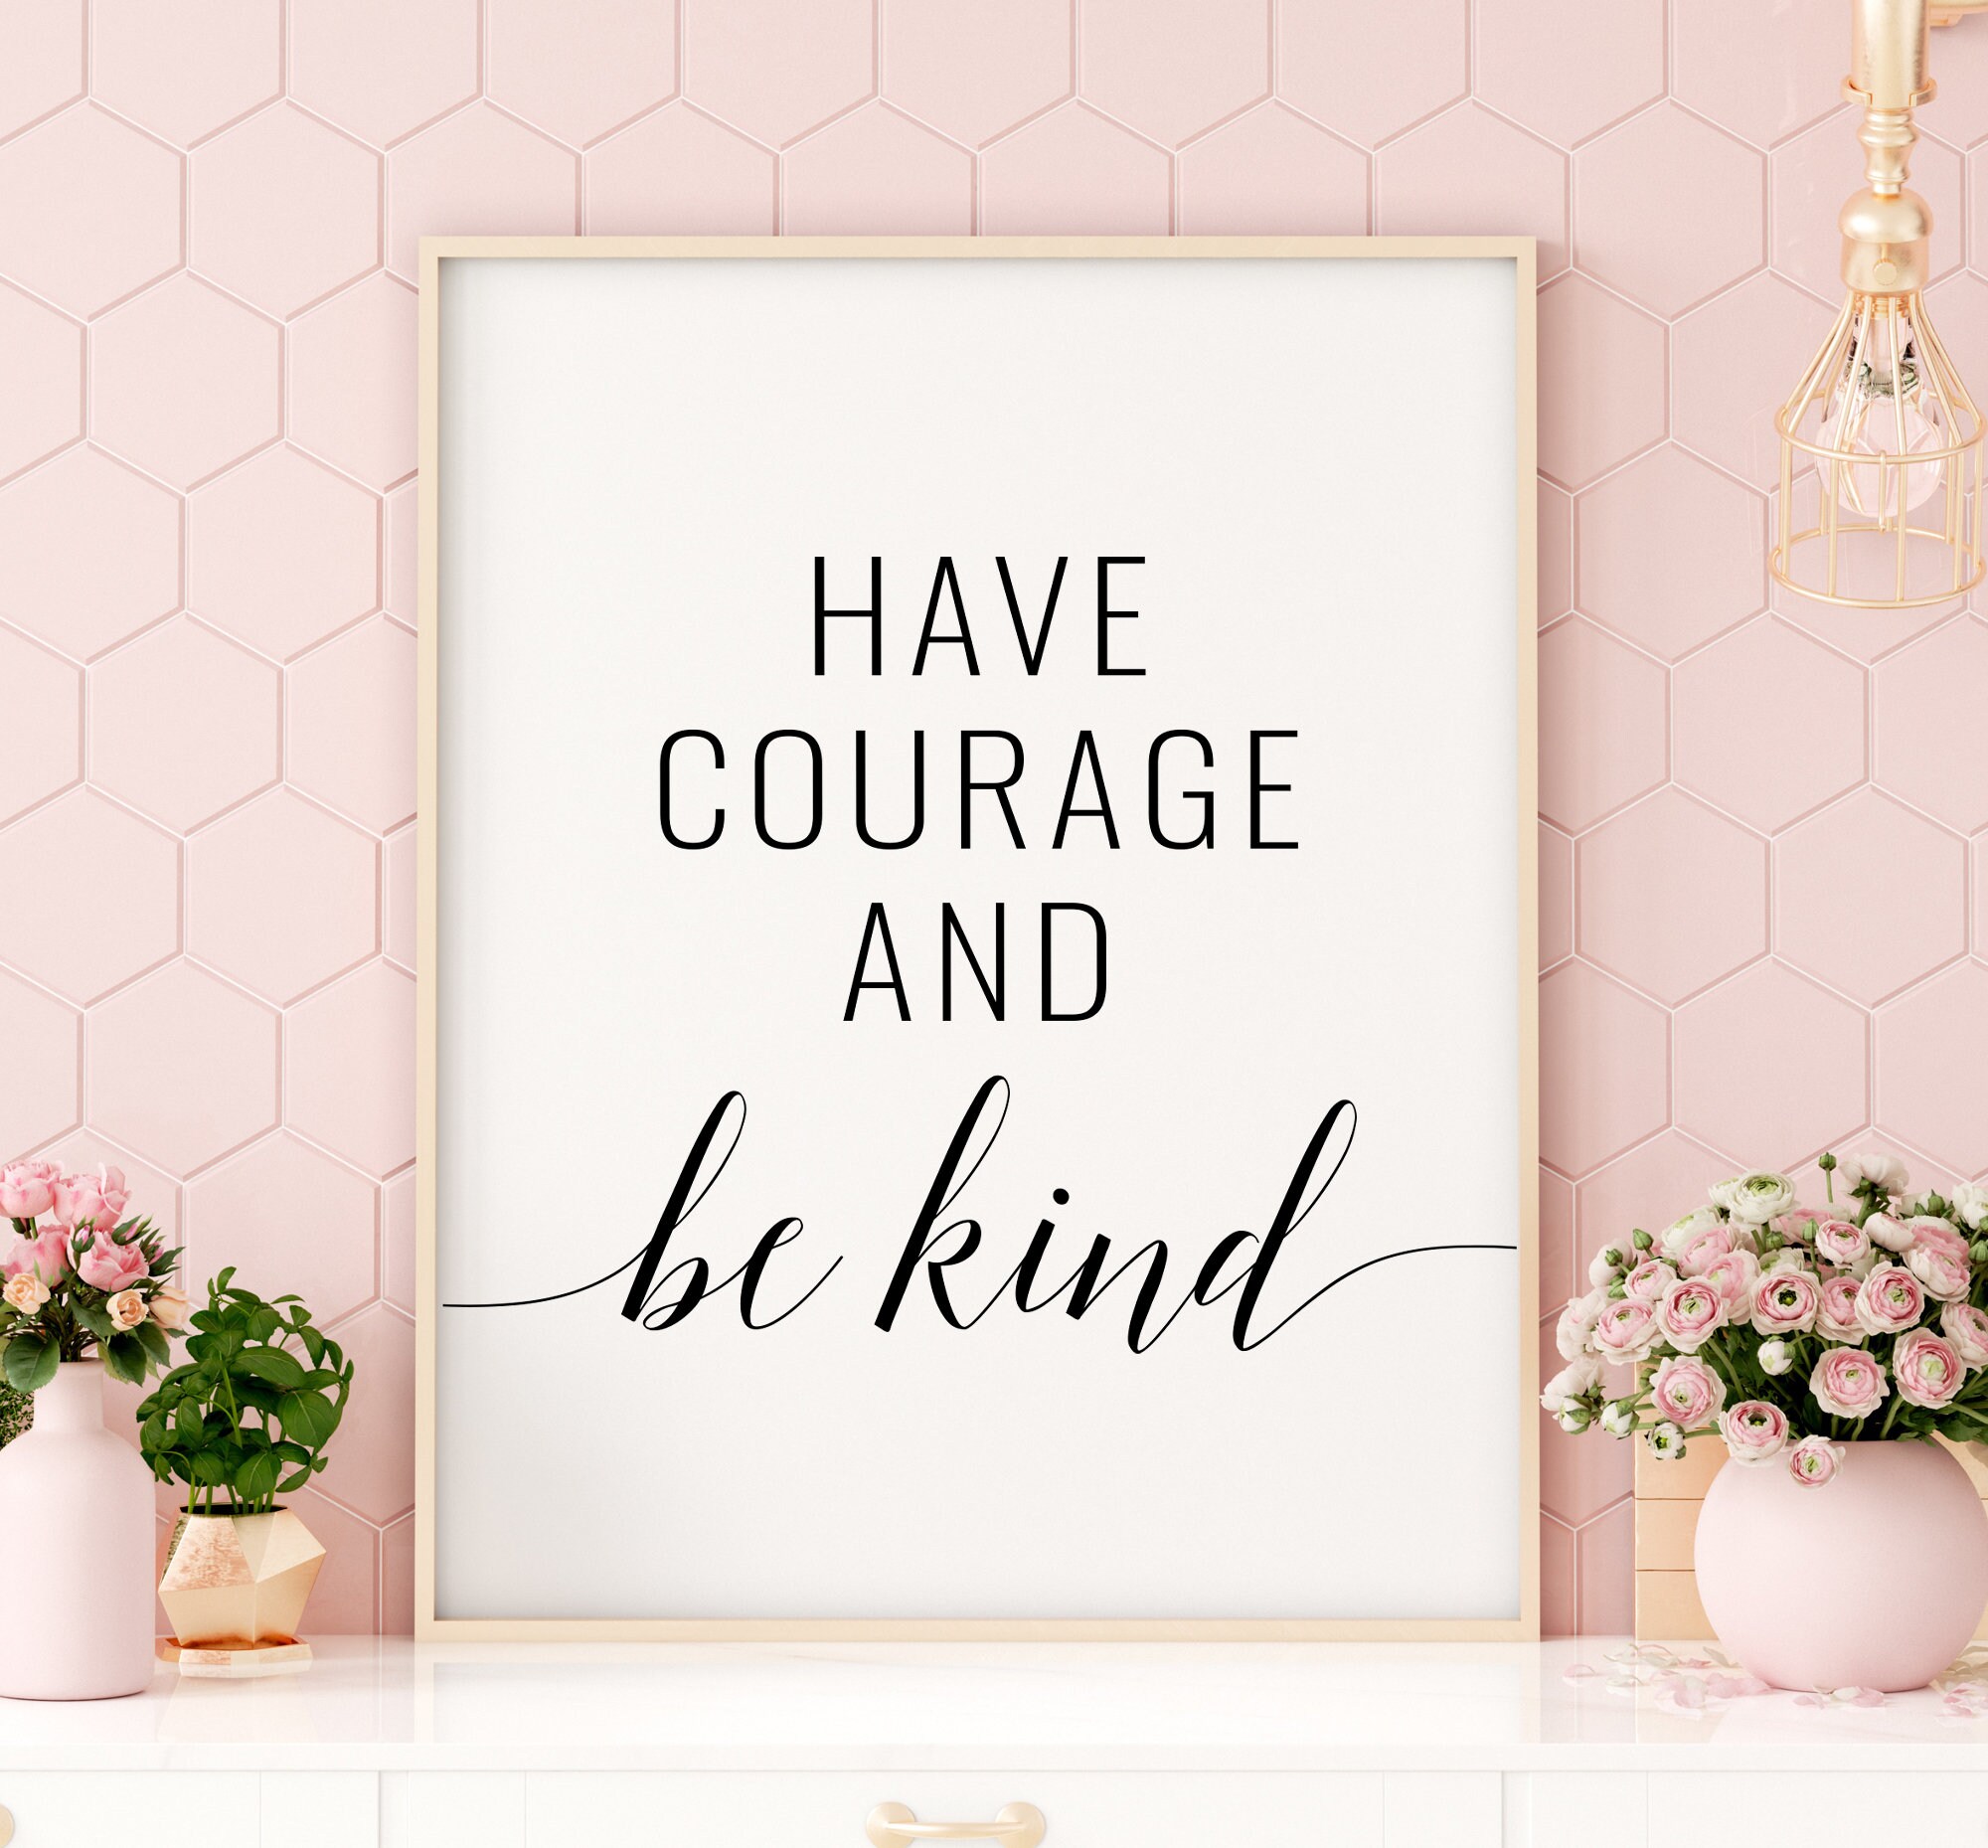 Have Courage and Be Kind Printable Art Inspirational Quote | Etsy